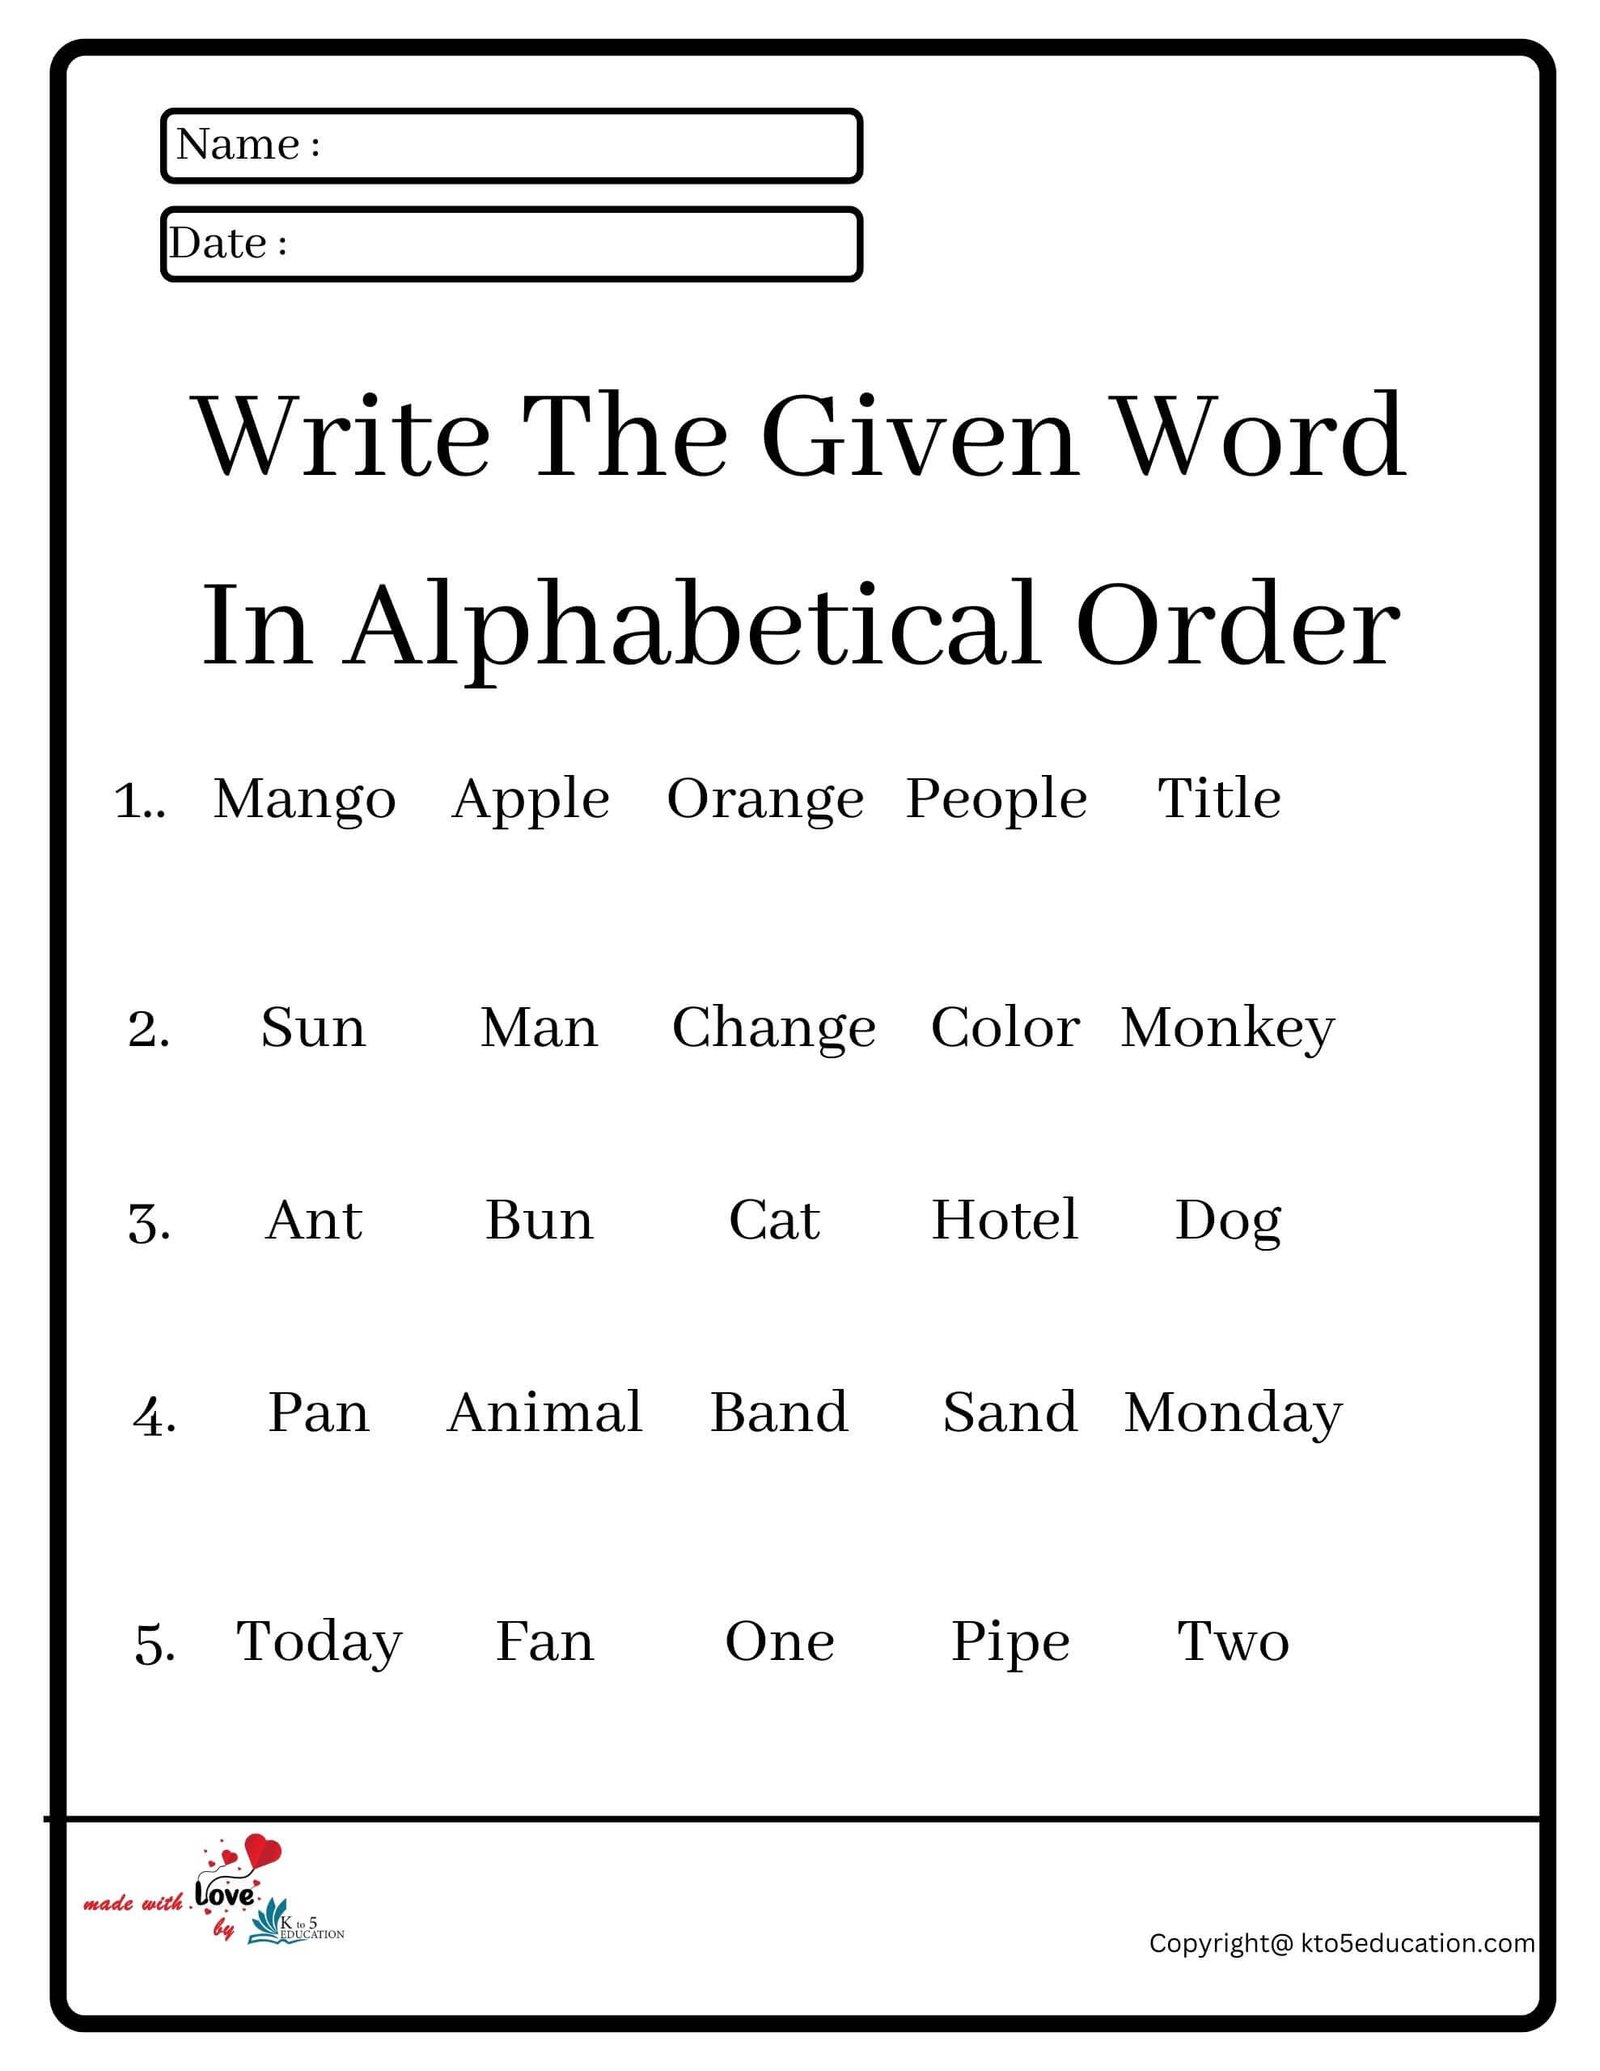 Write The Given World In Alphabetical Order Worksheet